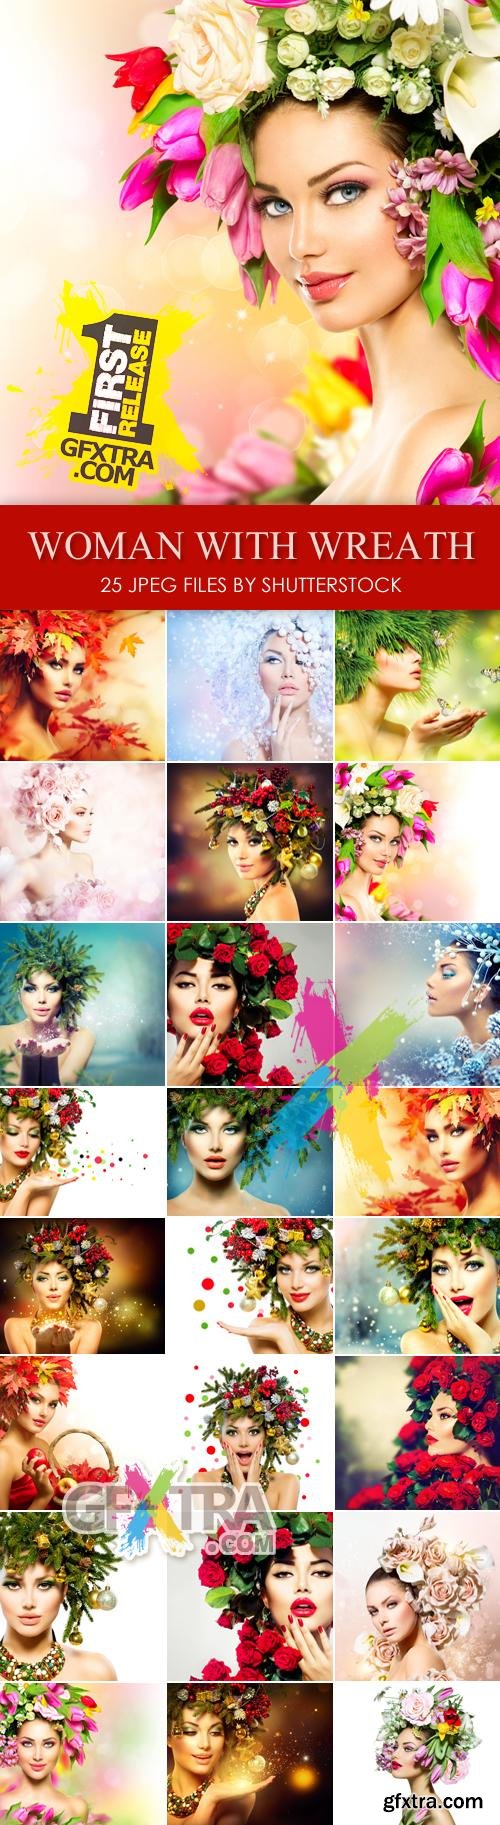 Stock Photo - Woman with Wreath on Her Head 25xJPG